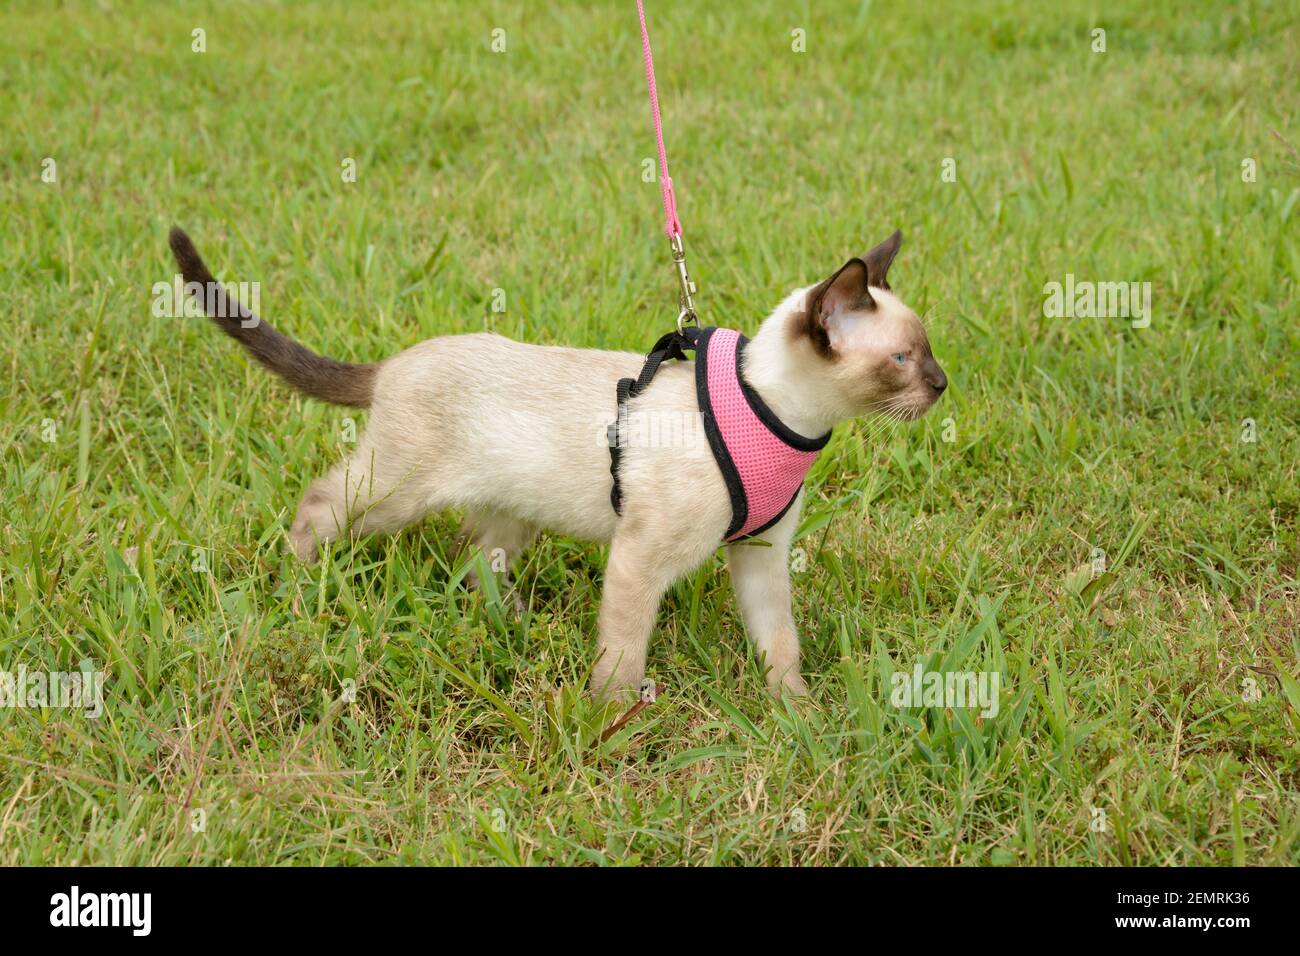 Side view of a beautiful young Siamese cat on an outdoor adventure in harness in green grass Stock Photo